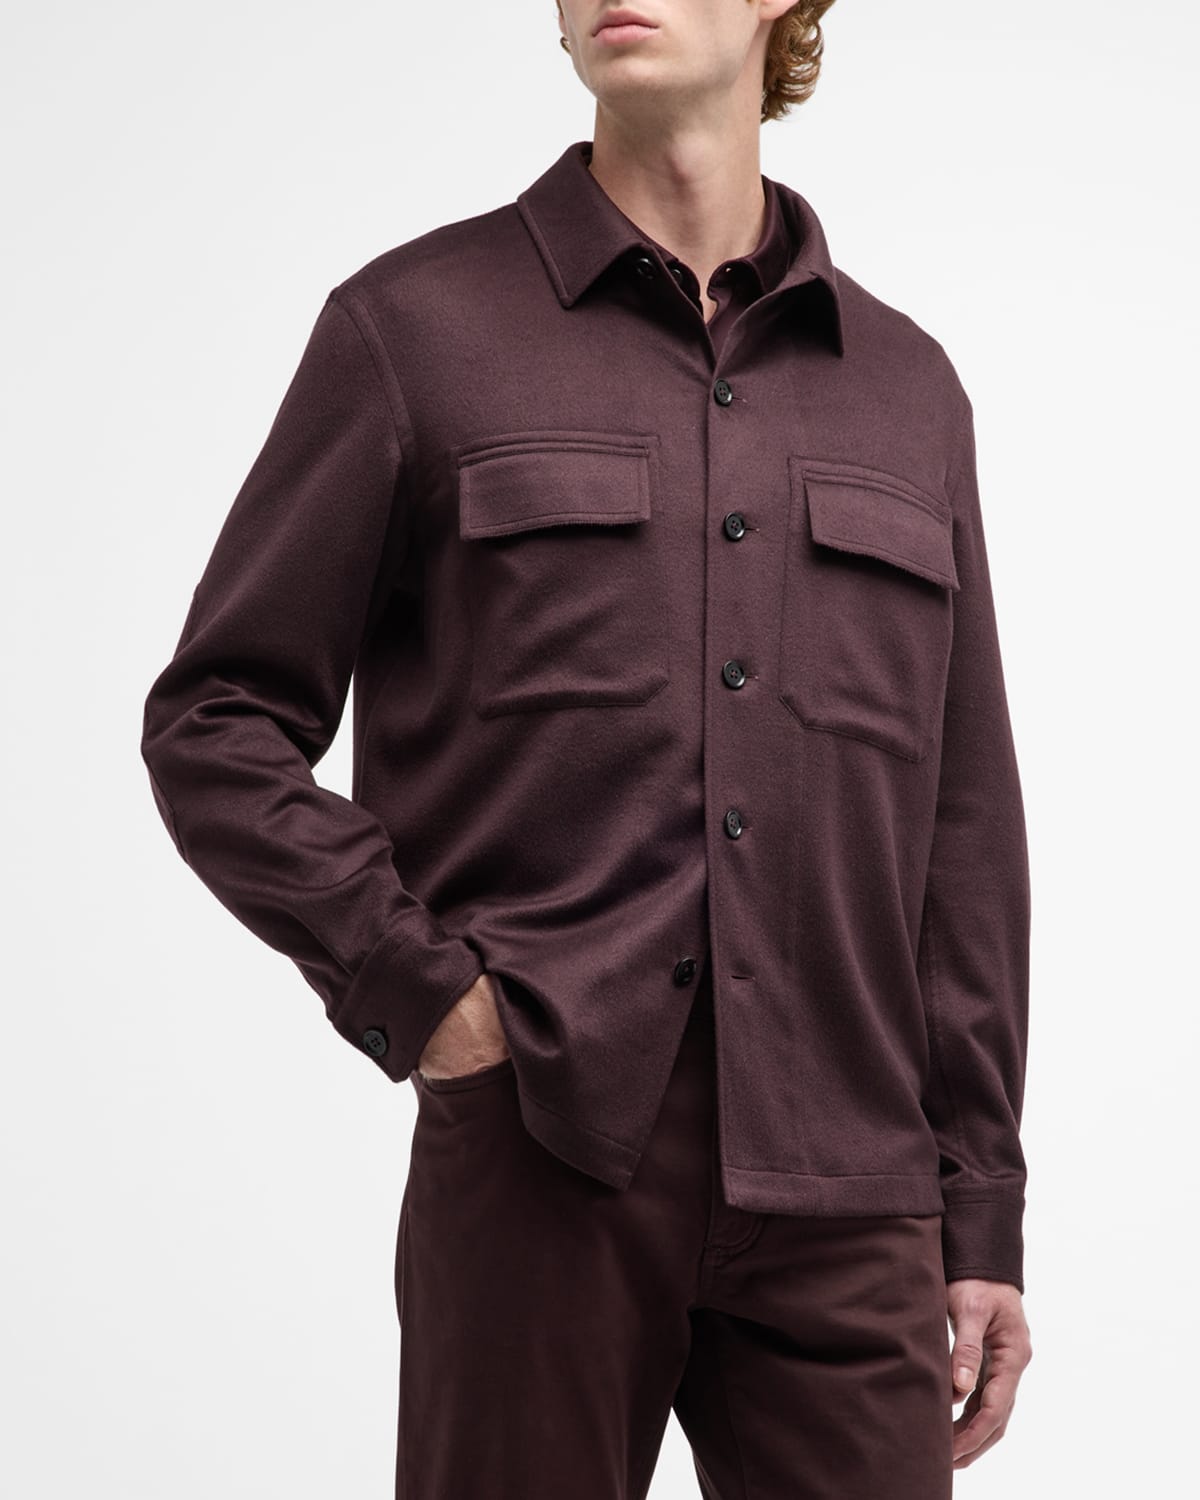 Zegna Men's Oasi Cashmere Overshirt In Dk Red Sld